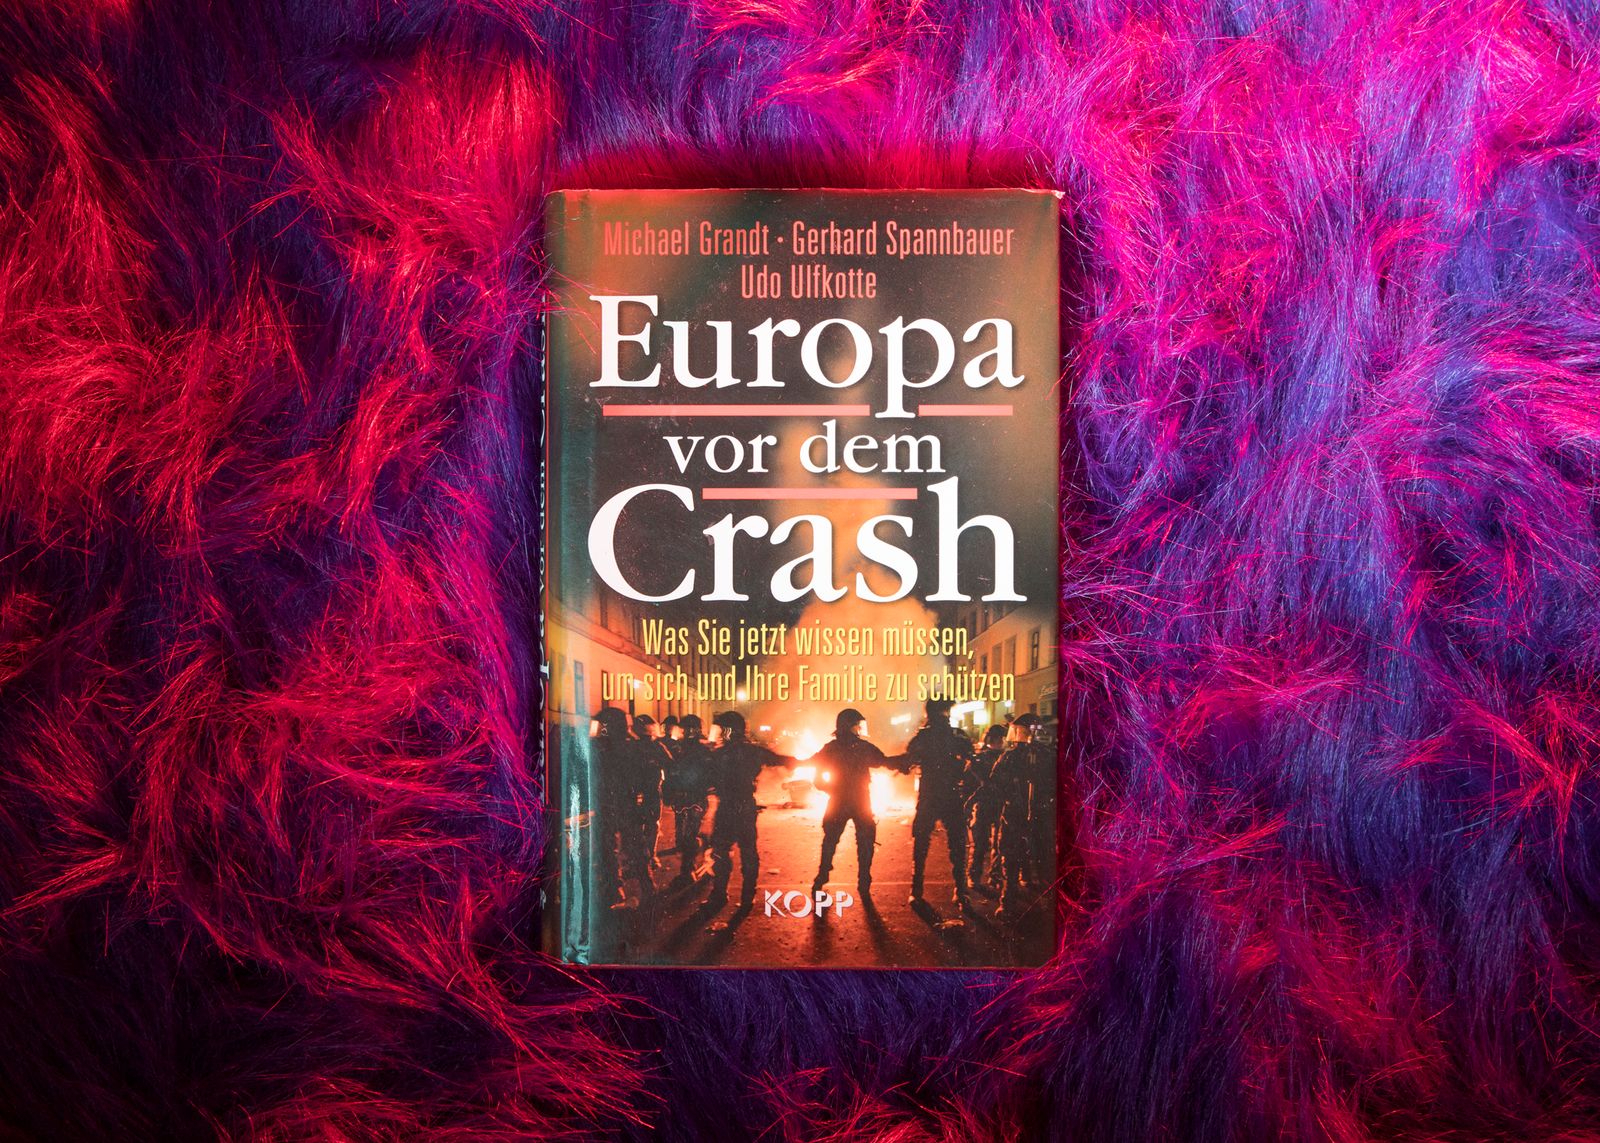 © Hahn Hartung - Book with the title "Europe about to crash"